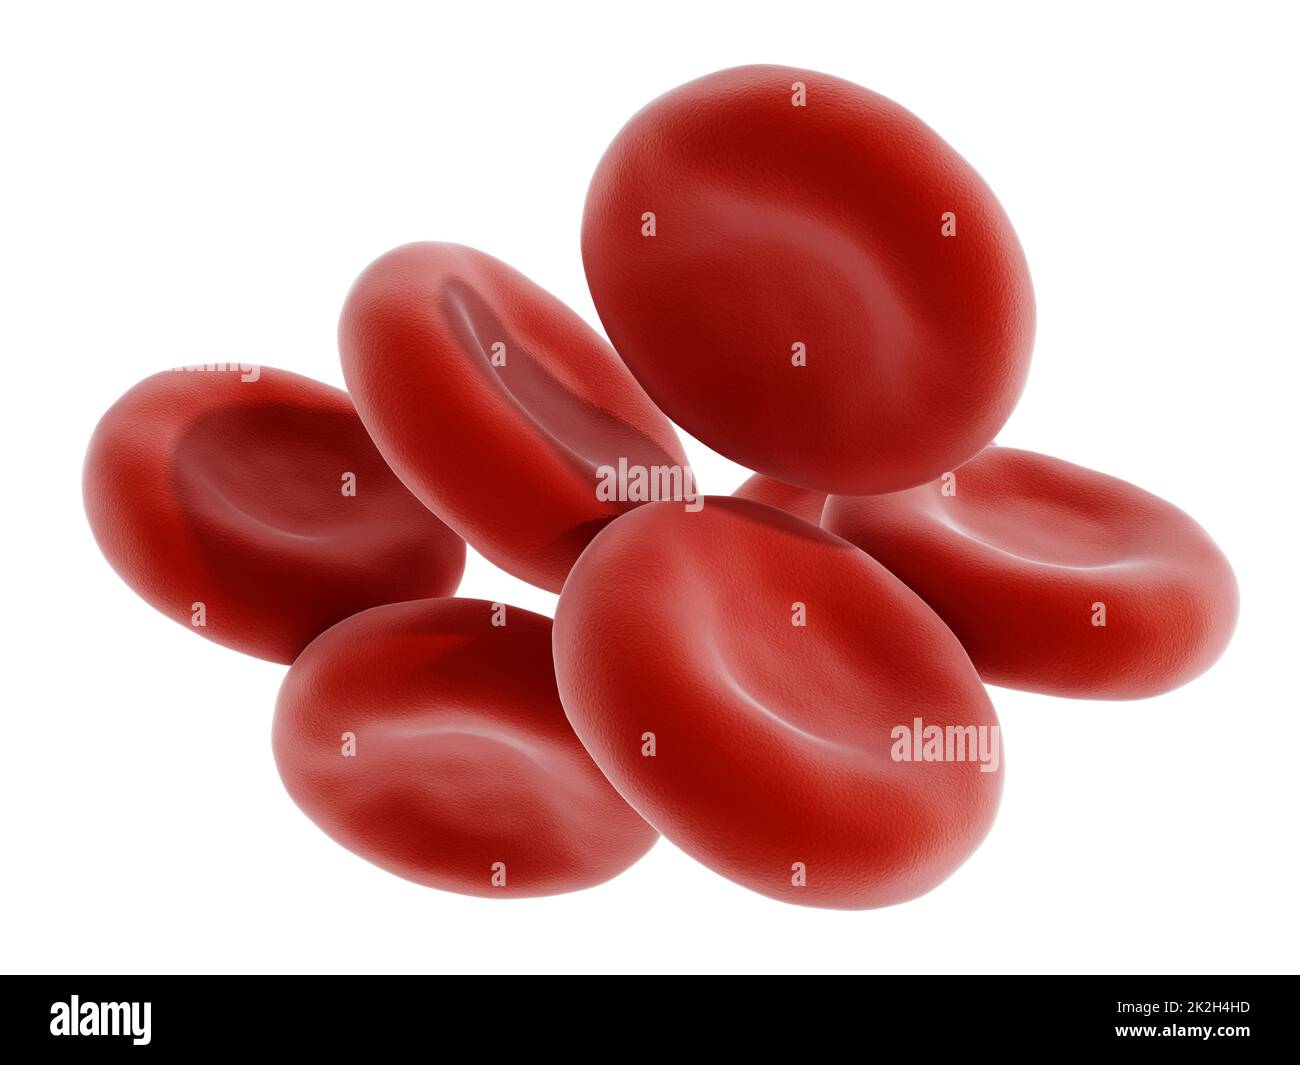 Red blood cell Stock Photo